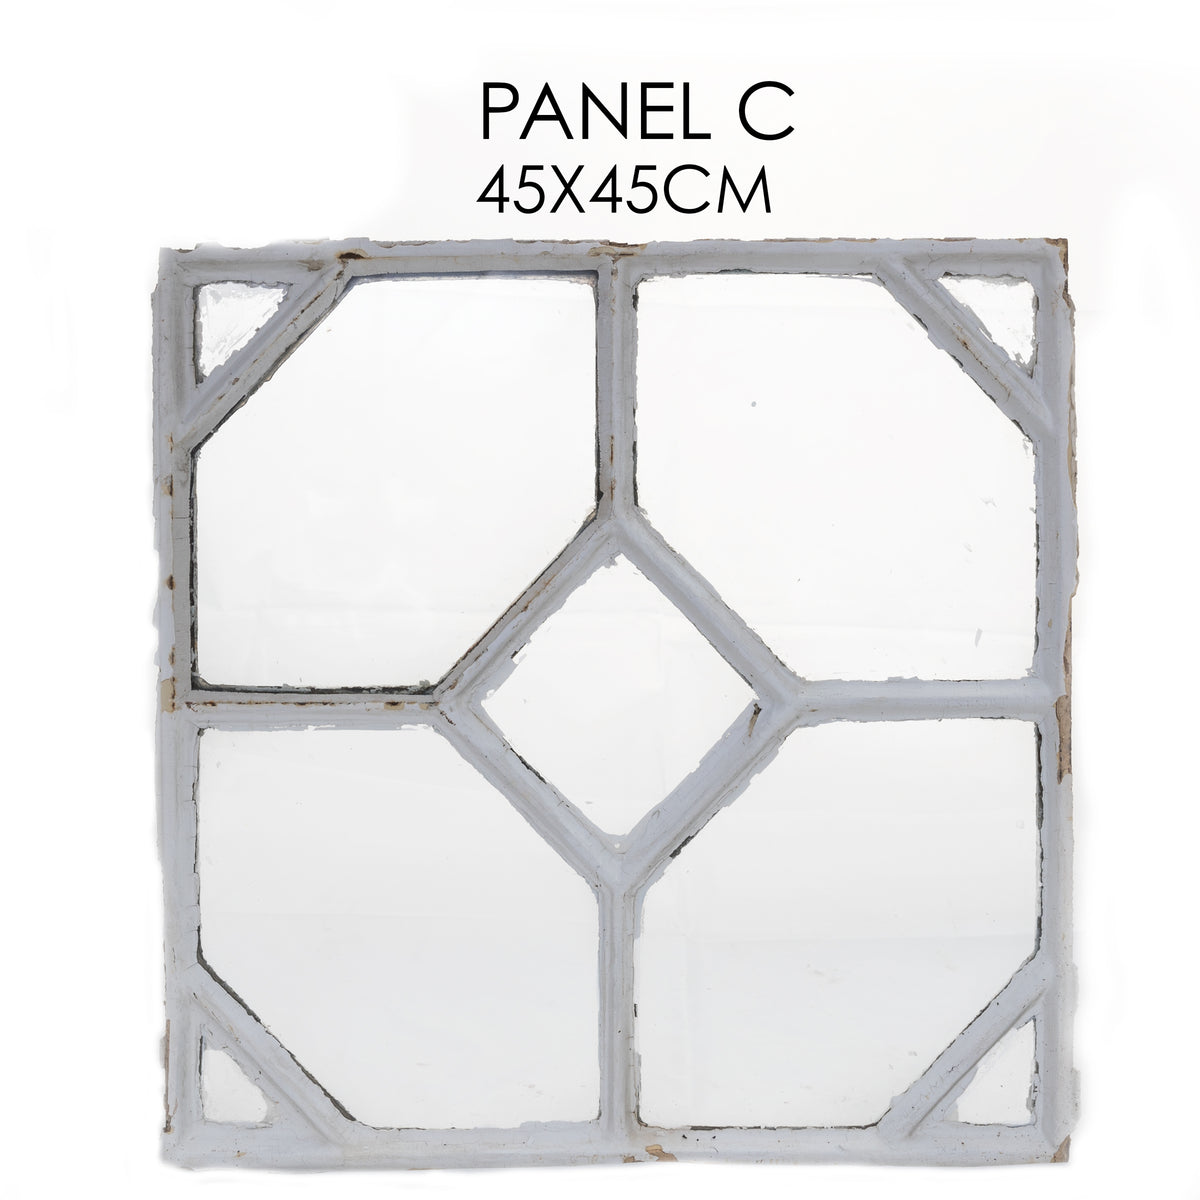 Reclaimed Late 19th Century Crittall Style Honeycomb Window Panels | The Architectural Forum